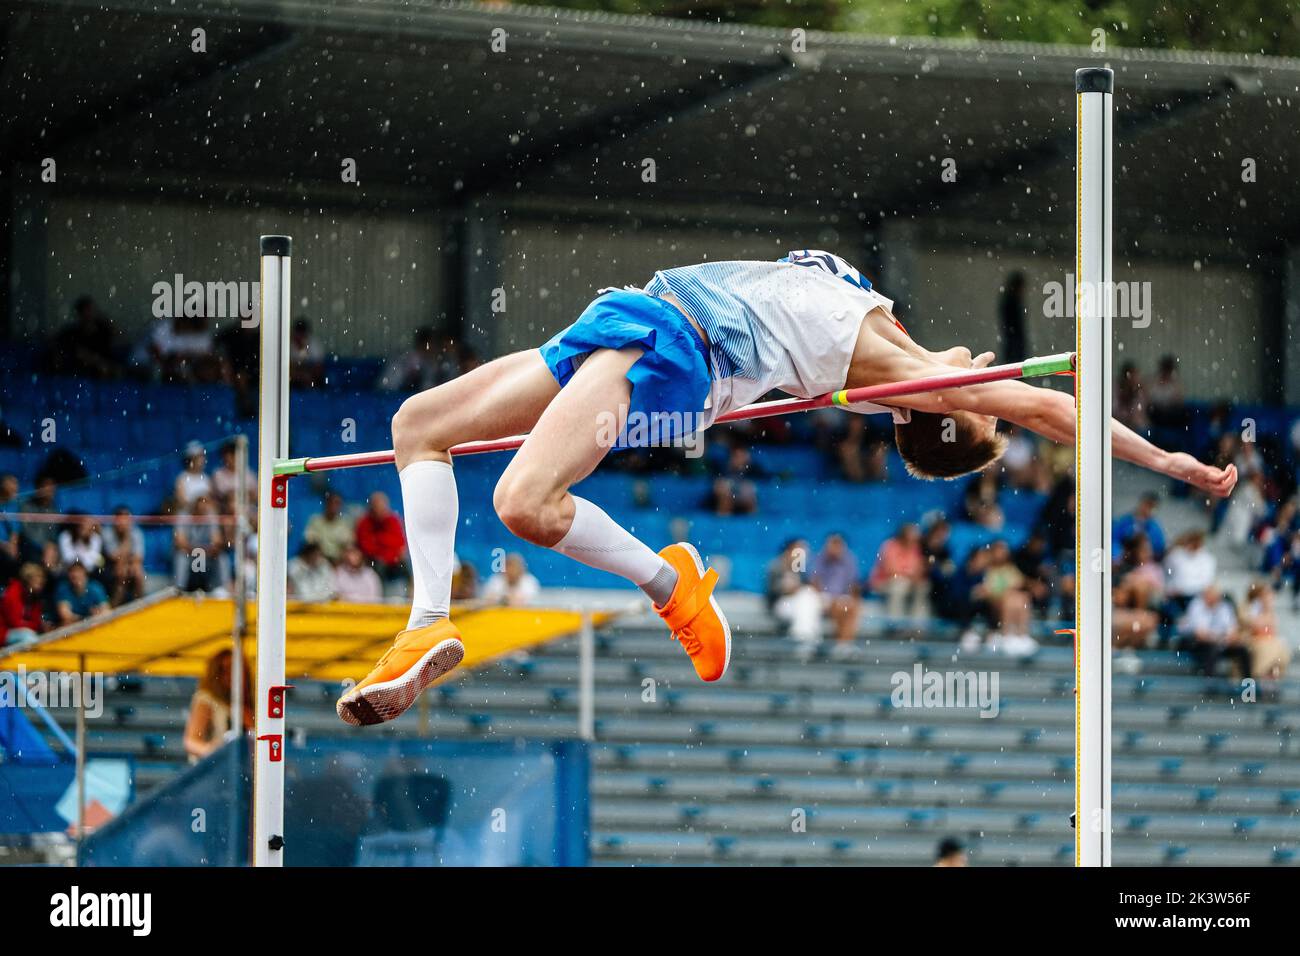 male jumper competition high jump in rain Stock Photo